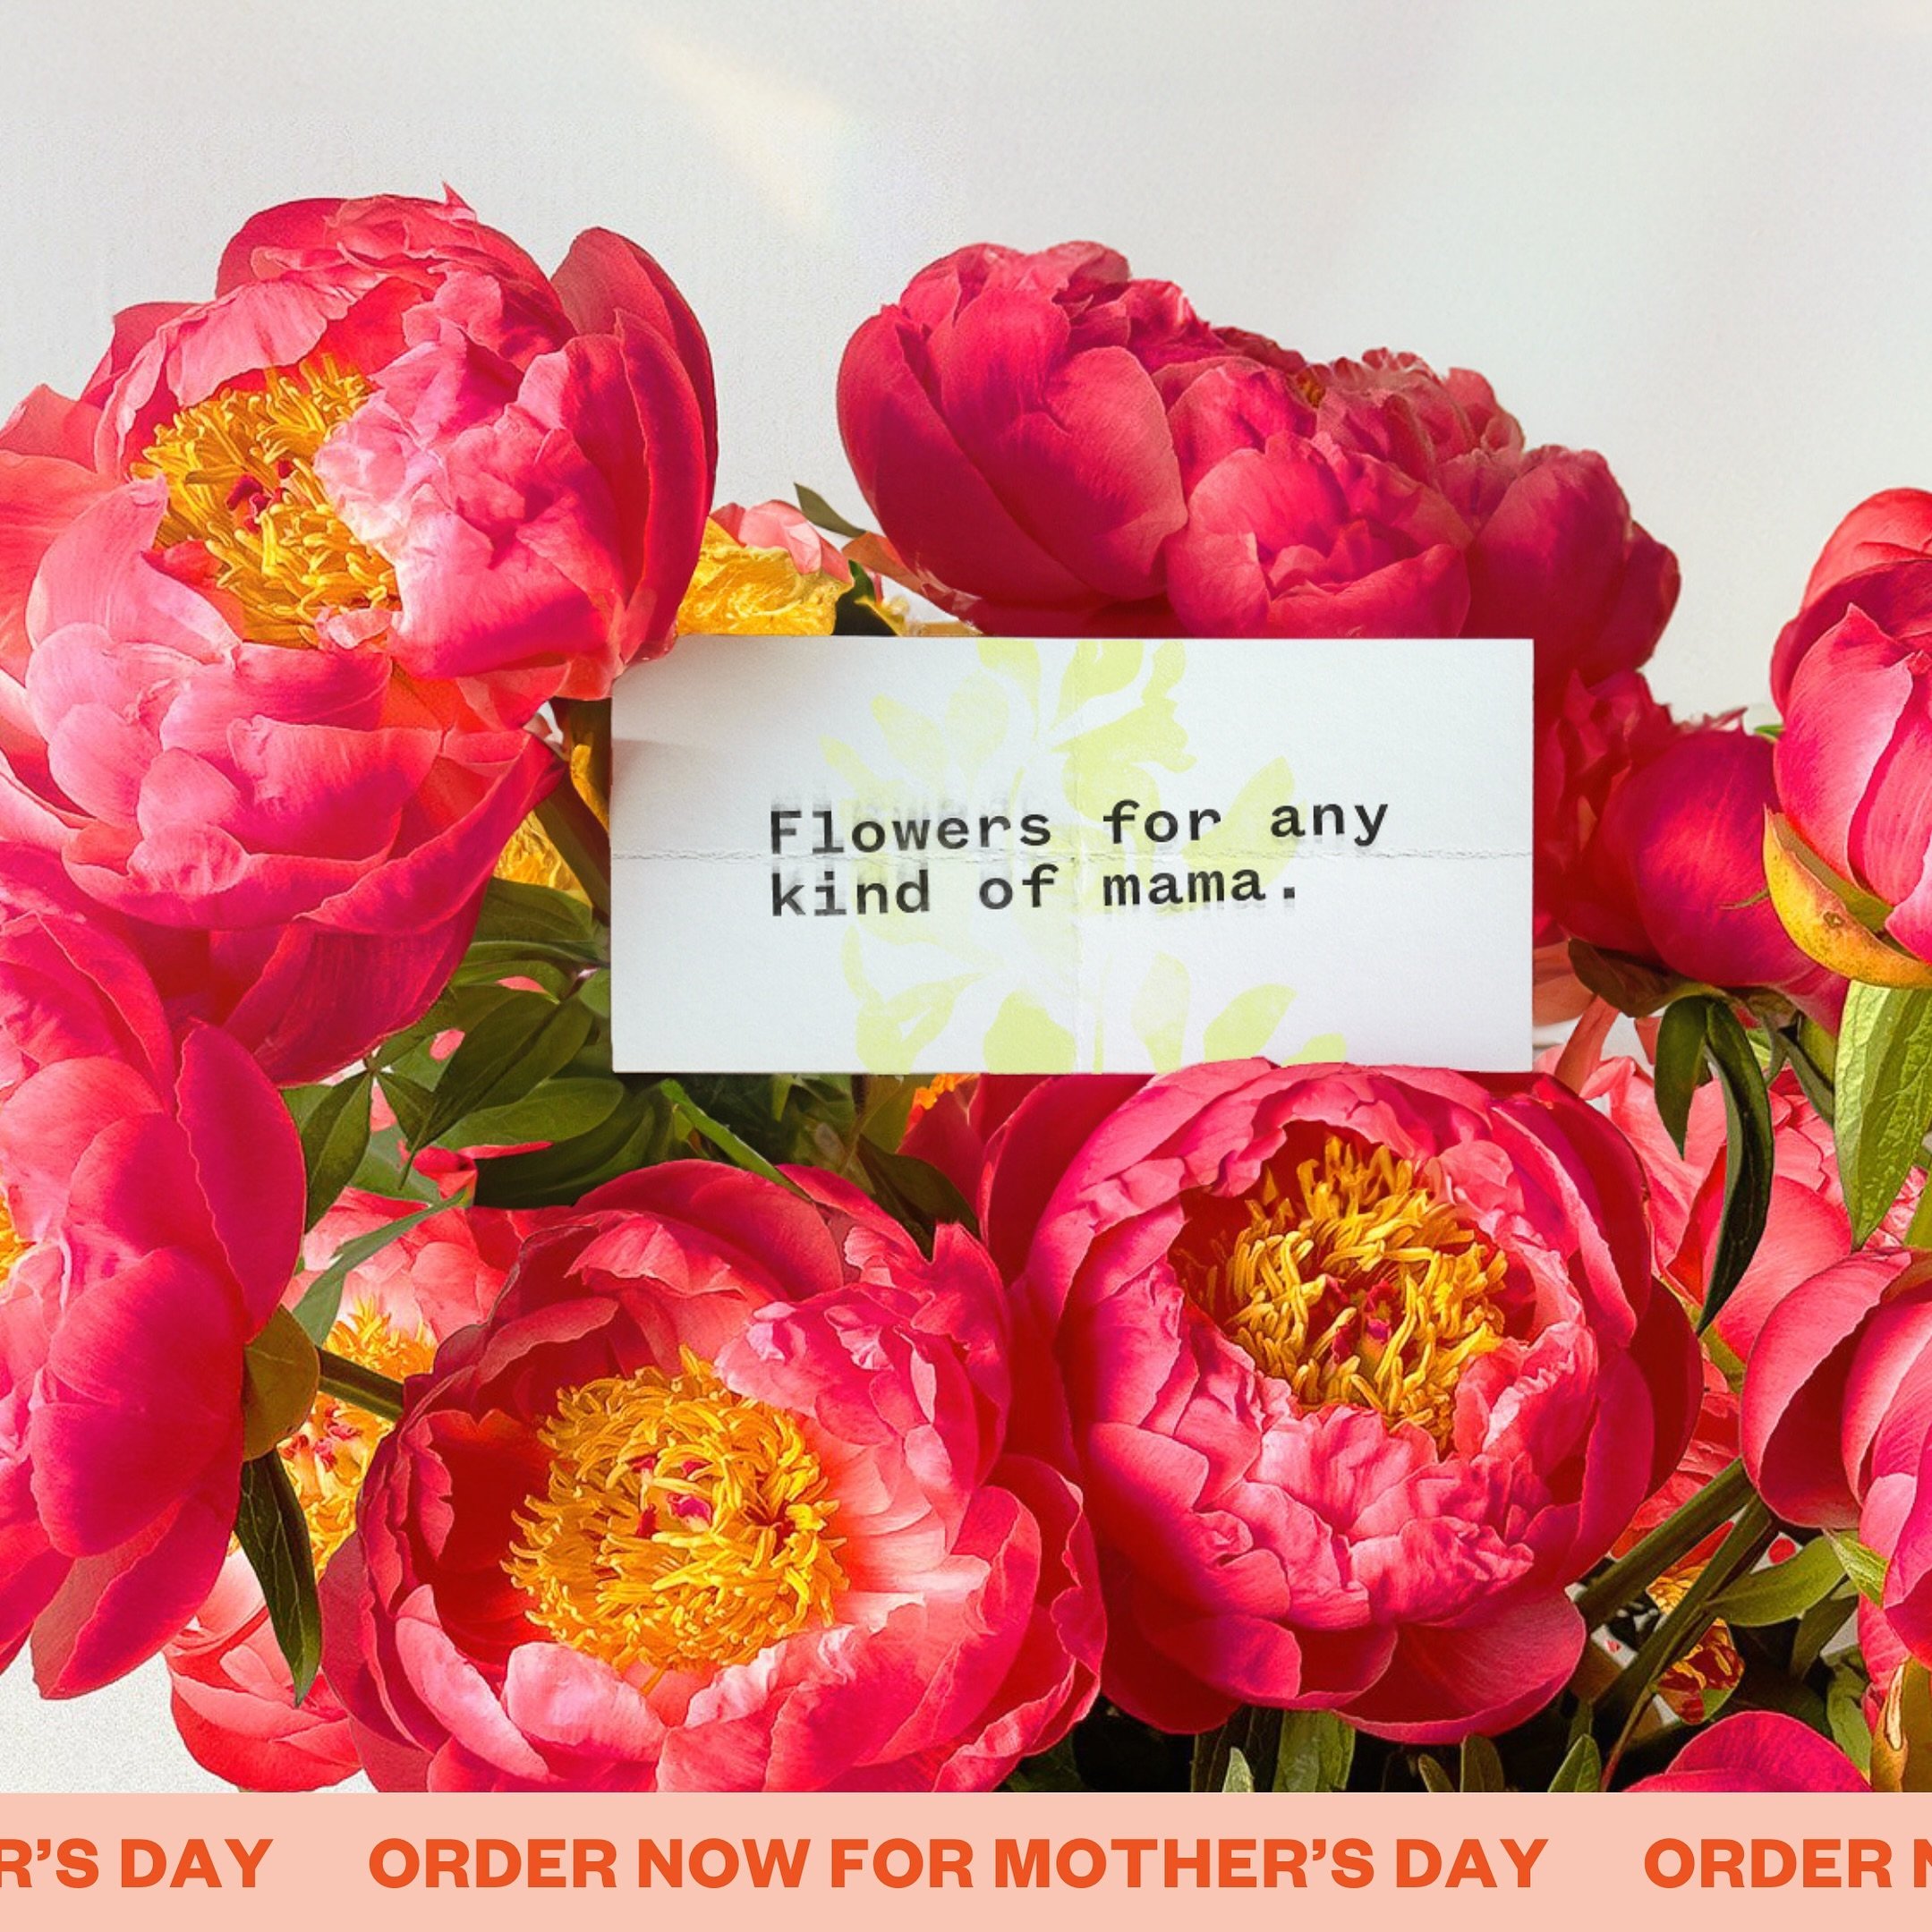 Your mama might be your Gigi, your next-door neighbor, your Mama Bear, your auntie, your gay dad, or even your BFF. At Ergo, we believe Mother&rsquo;s Day flowers are for any kind of mama figure in your life.

📆 Place your orders now for pickup or d